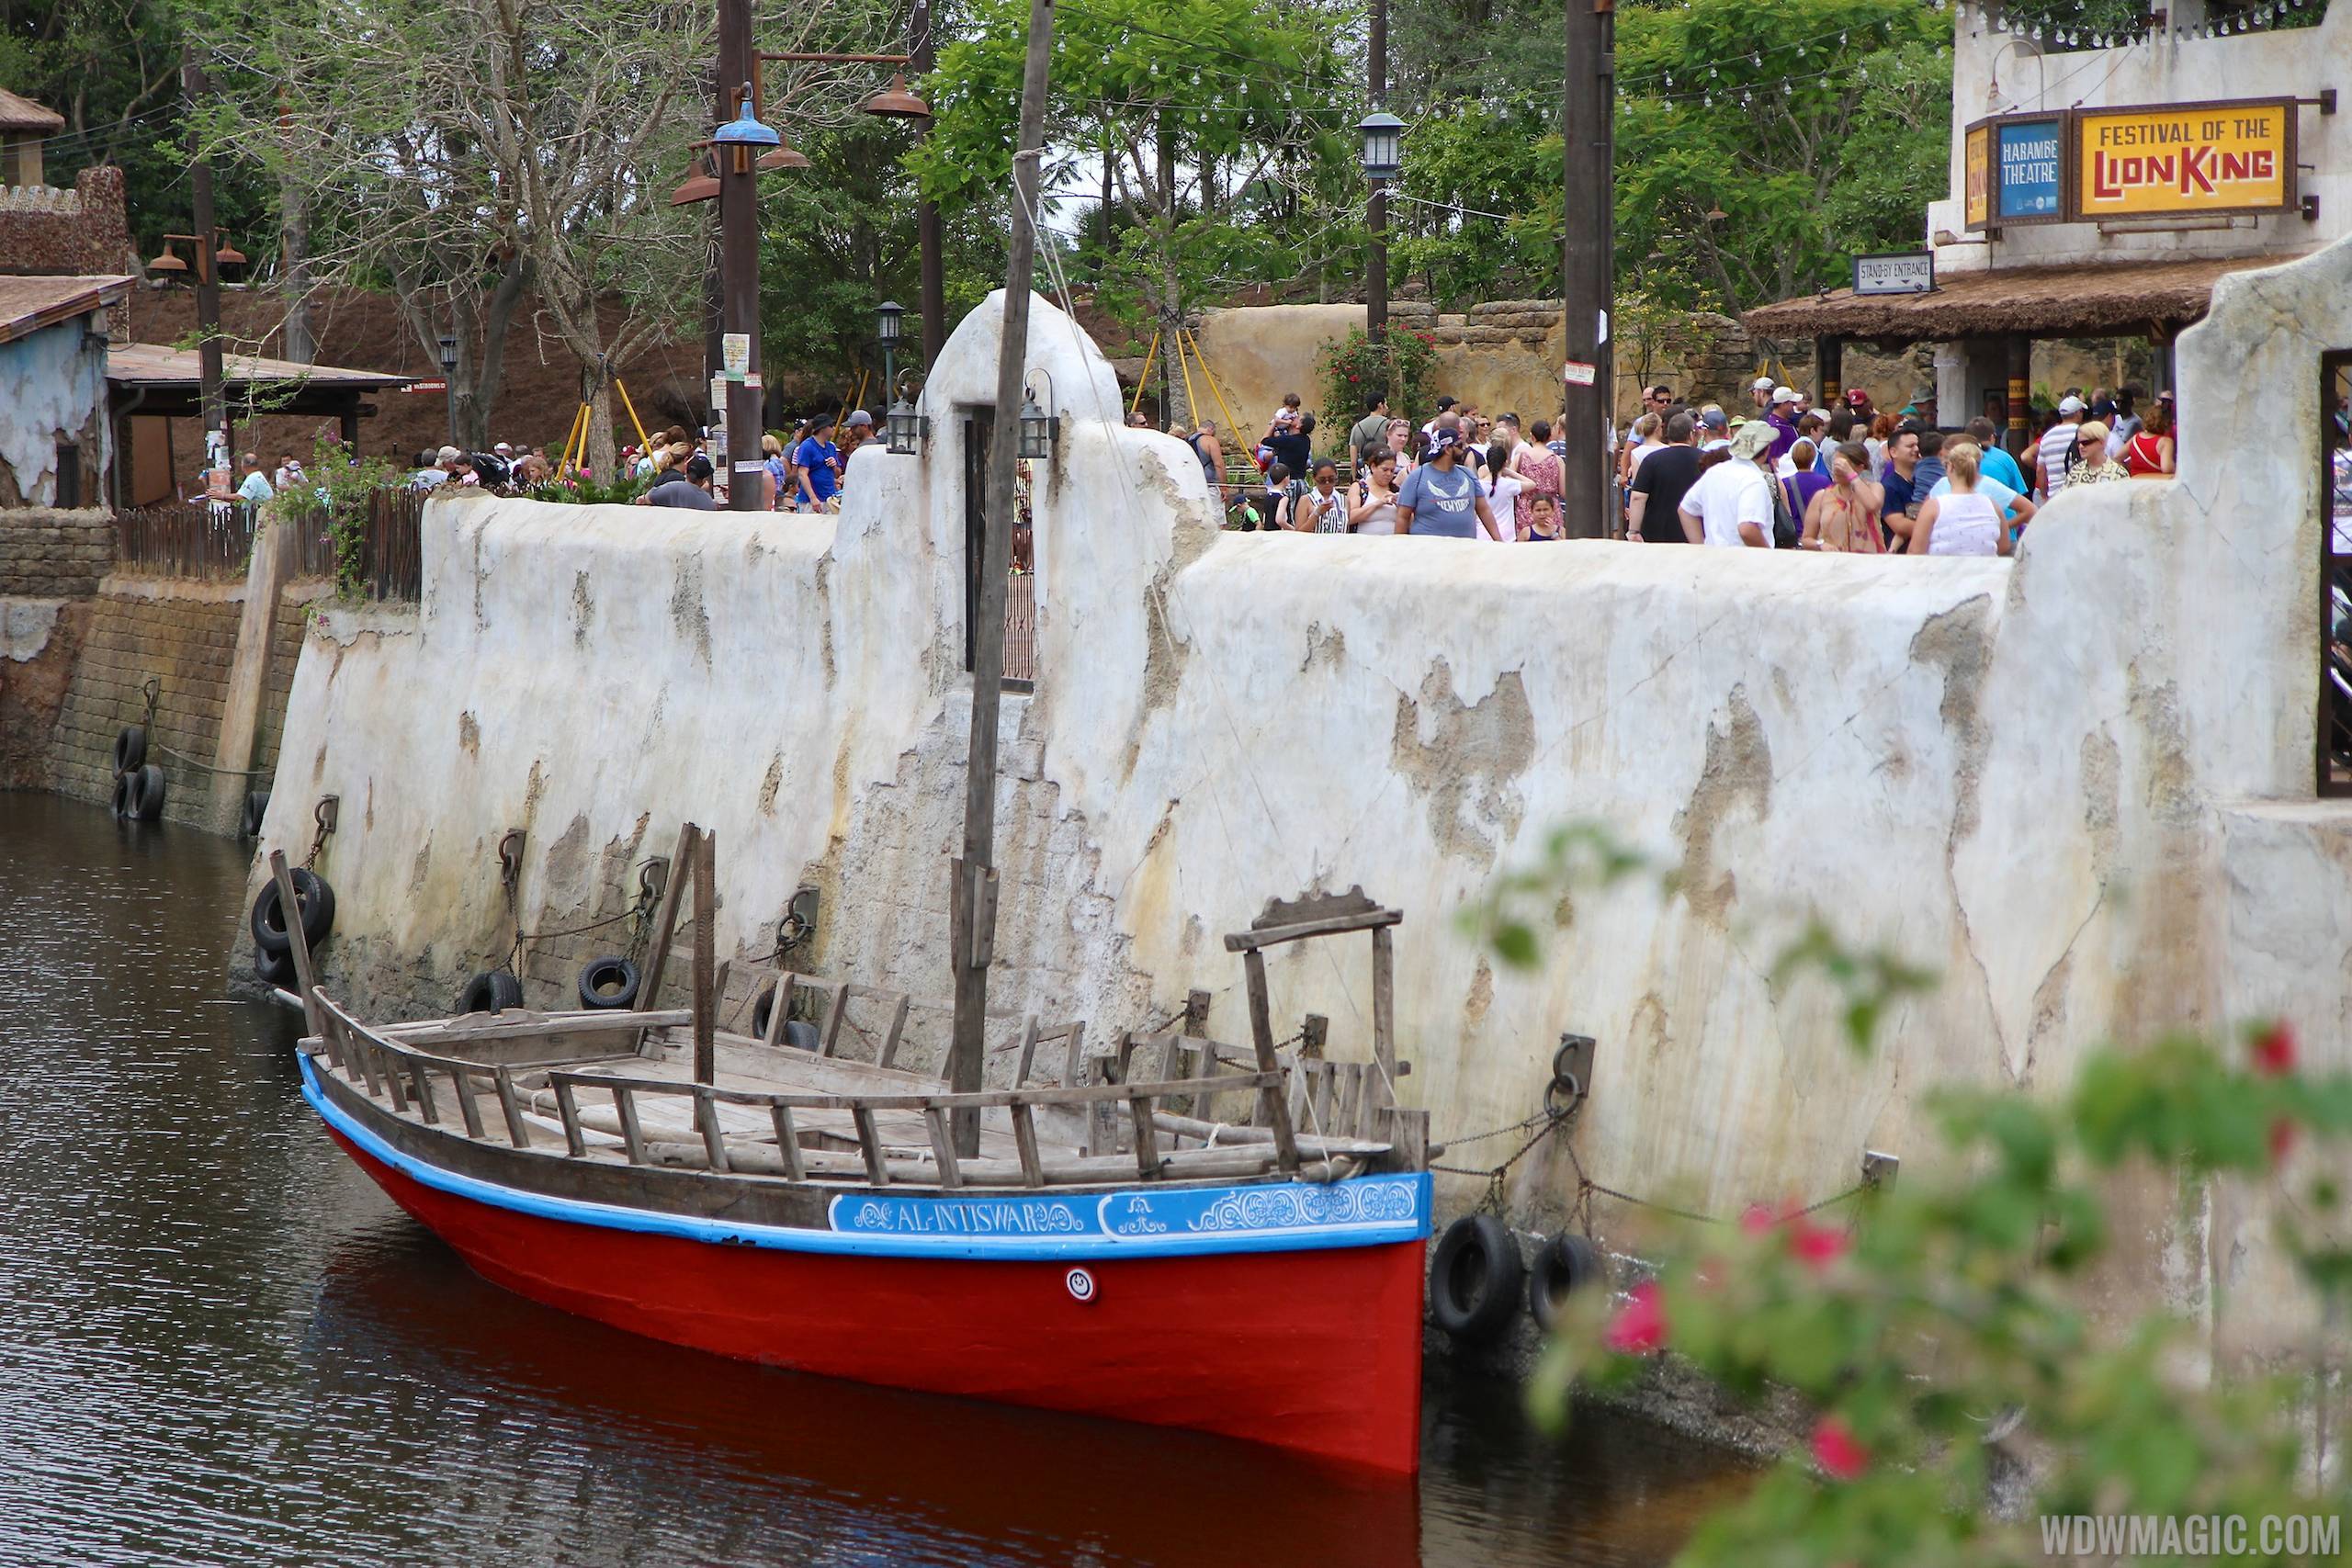 New Harambe Theatre area in Africa - View of the river